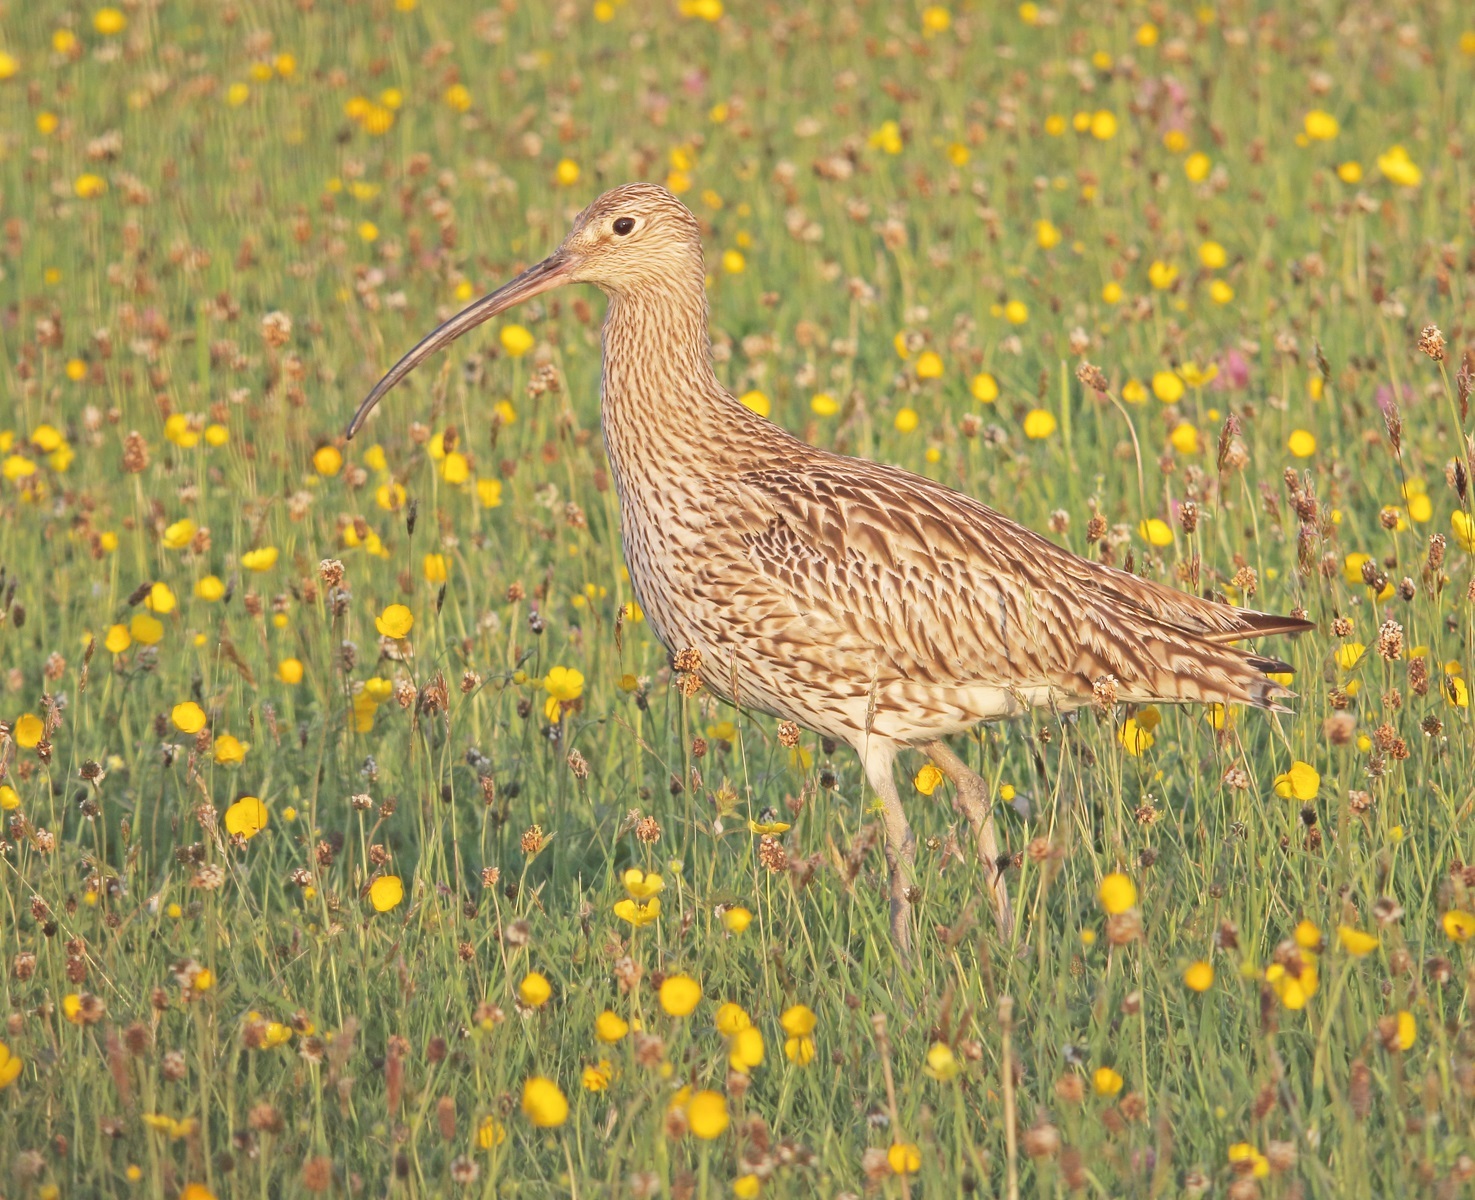 Curlew in hay meadow – Picture: Kelvin Smith